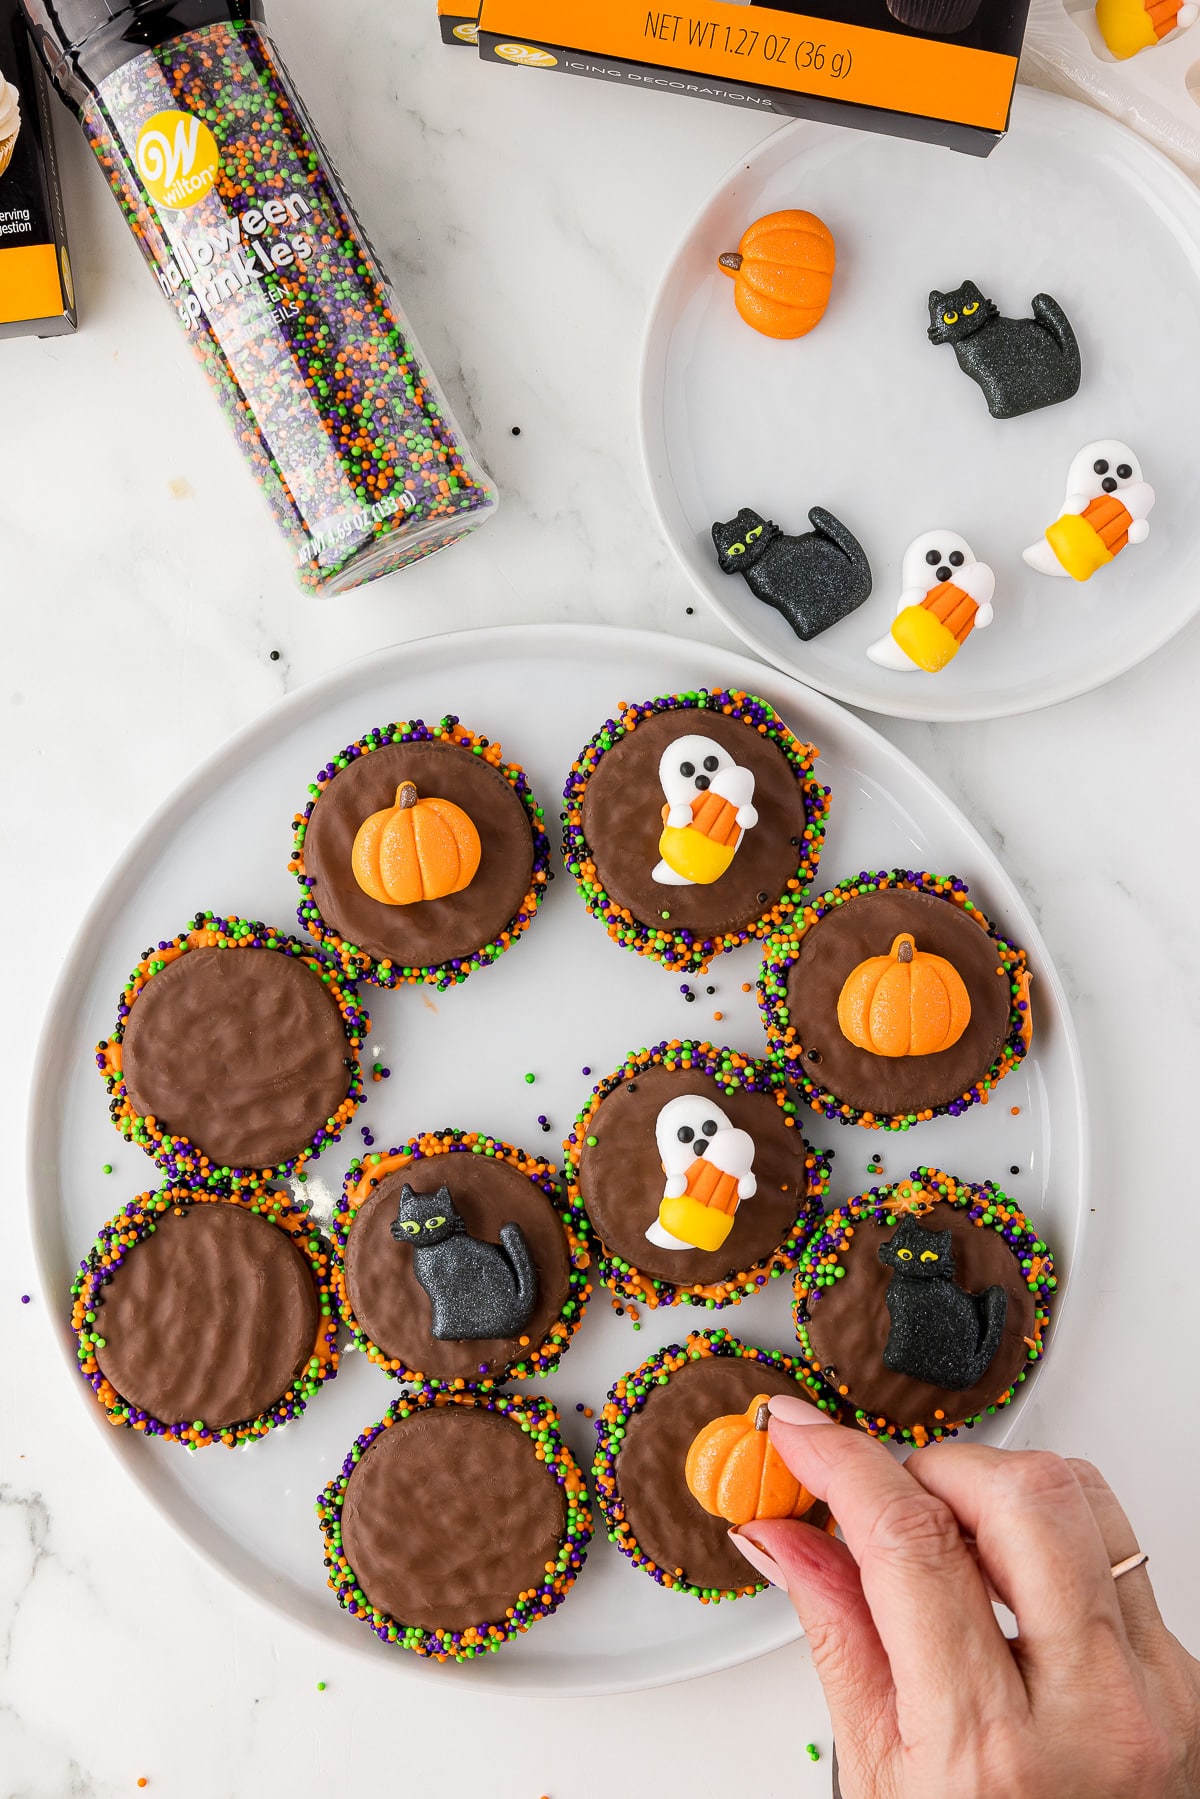 Wilton icing candy on fudge covered oreos on a white plate with halloween decorations and sprinkles on the counter. 